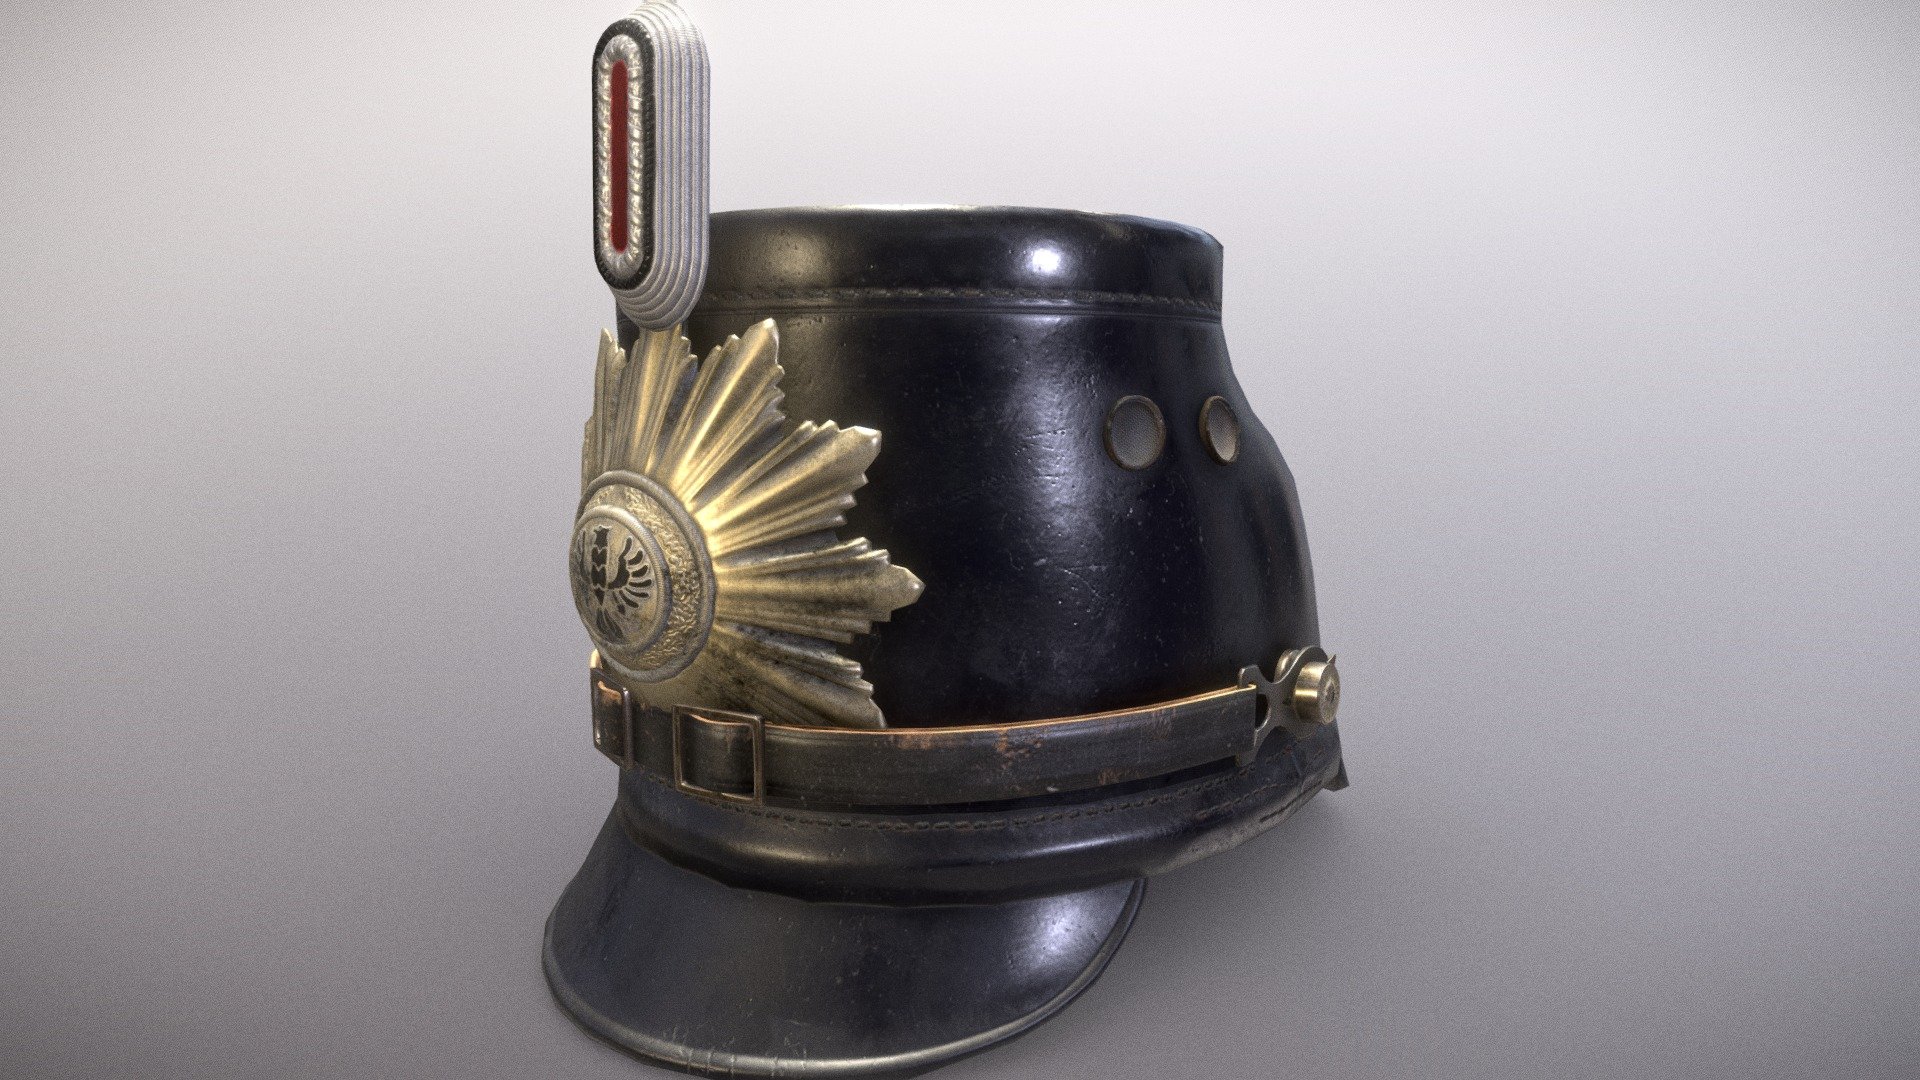 This shako was used by the police during the Weimar Republic from ~1920s-1933. It was a lot of fun to search for references and model this headgear! 

Feel free to share your opinion! - Weimar Republic (Prussian) Polizei shako - 3D model by MrKenshi 3d model